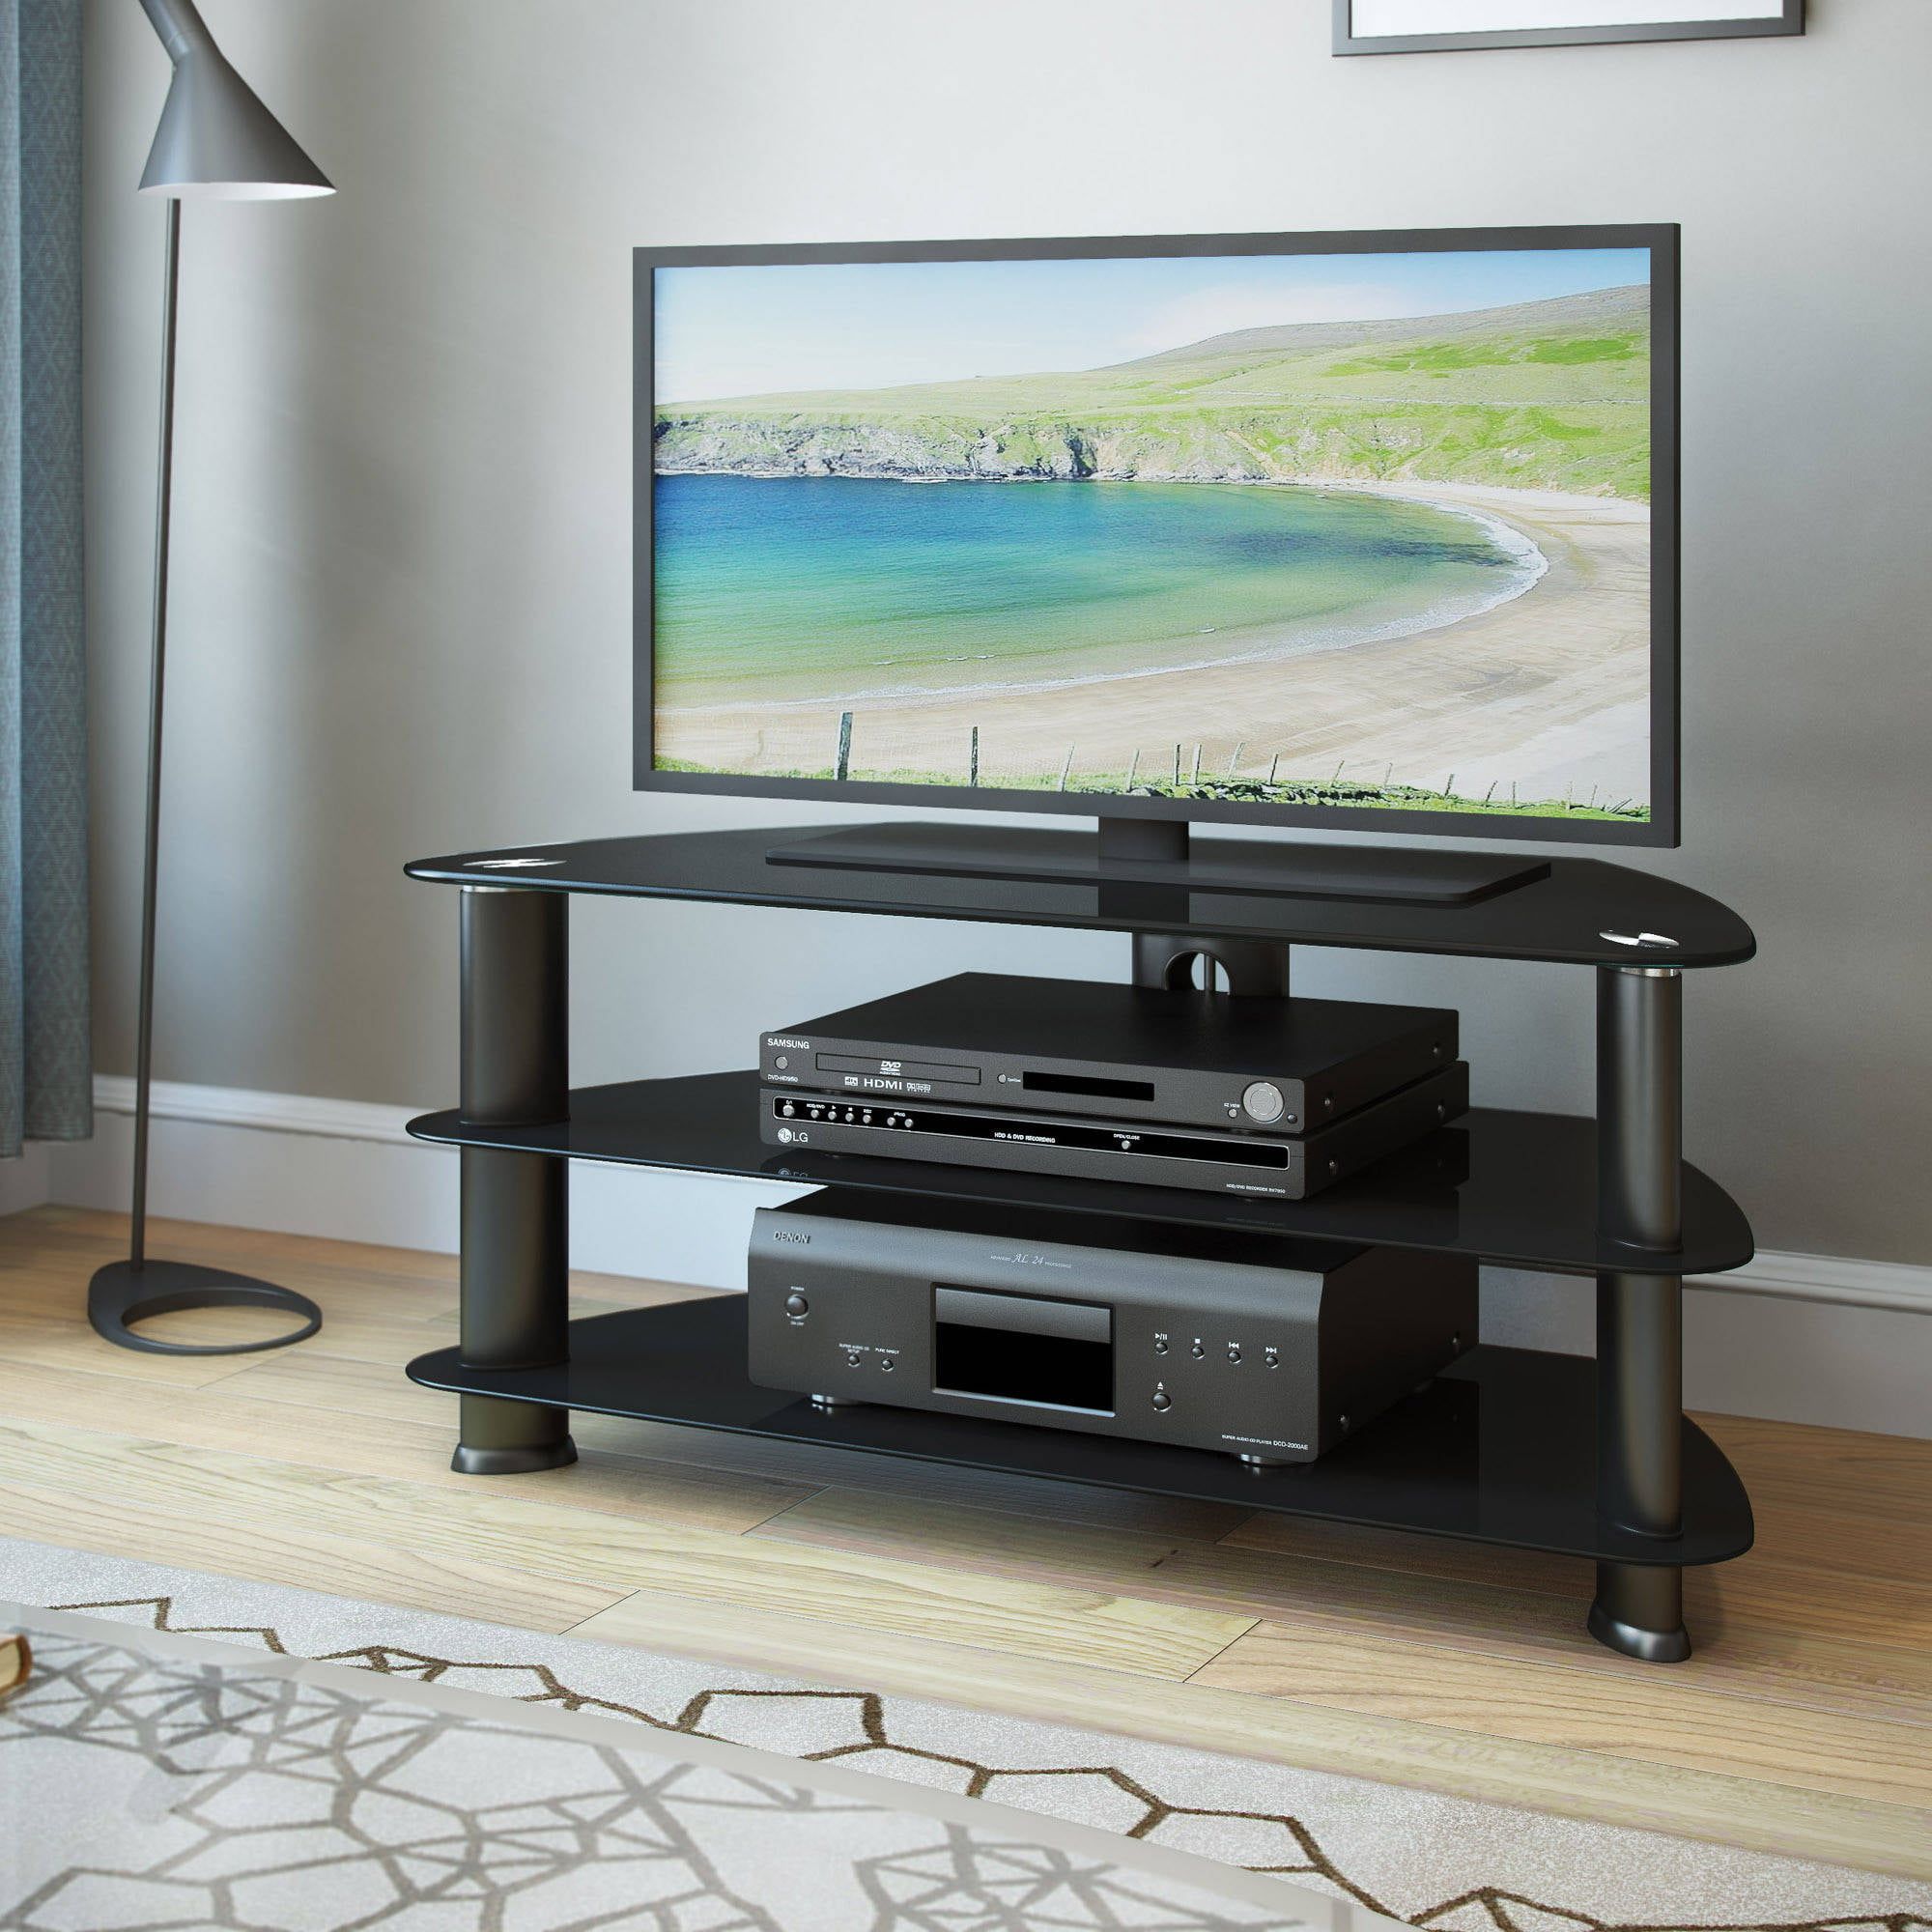 Laguna Satin Black Corner Tv Stand For Tvs Up To 50" – Walmart Within Black Marble Tv Stands (View 17 of 20)